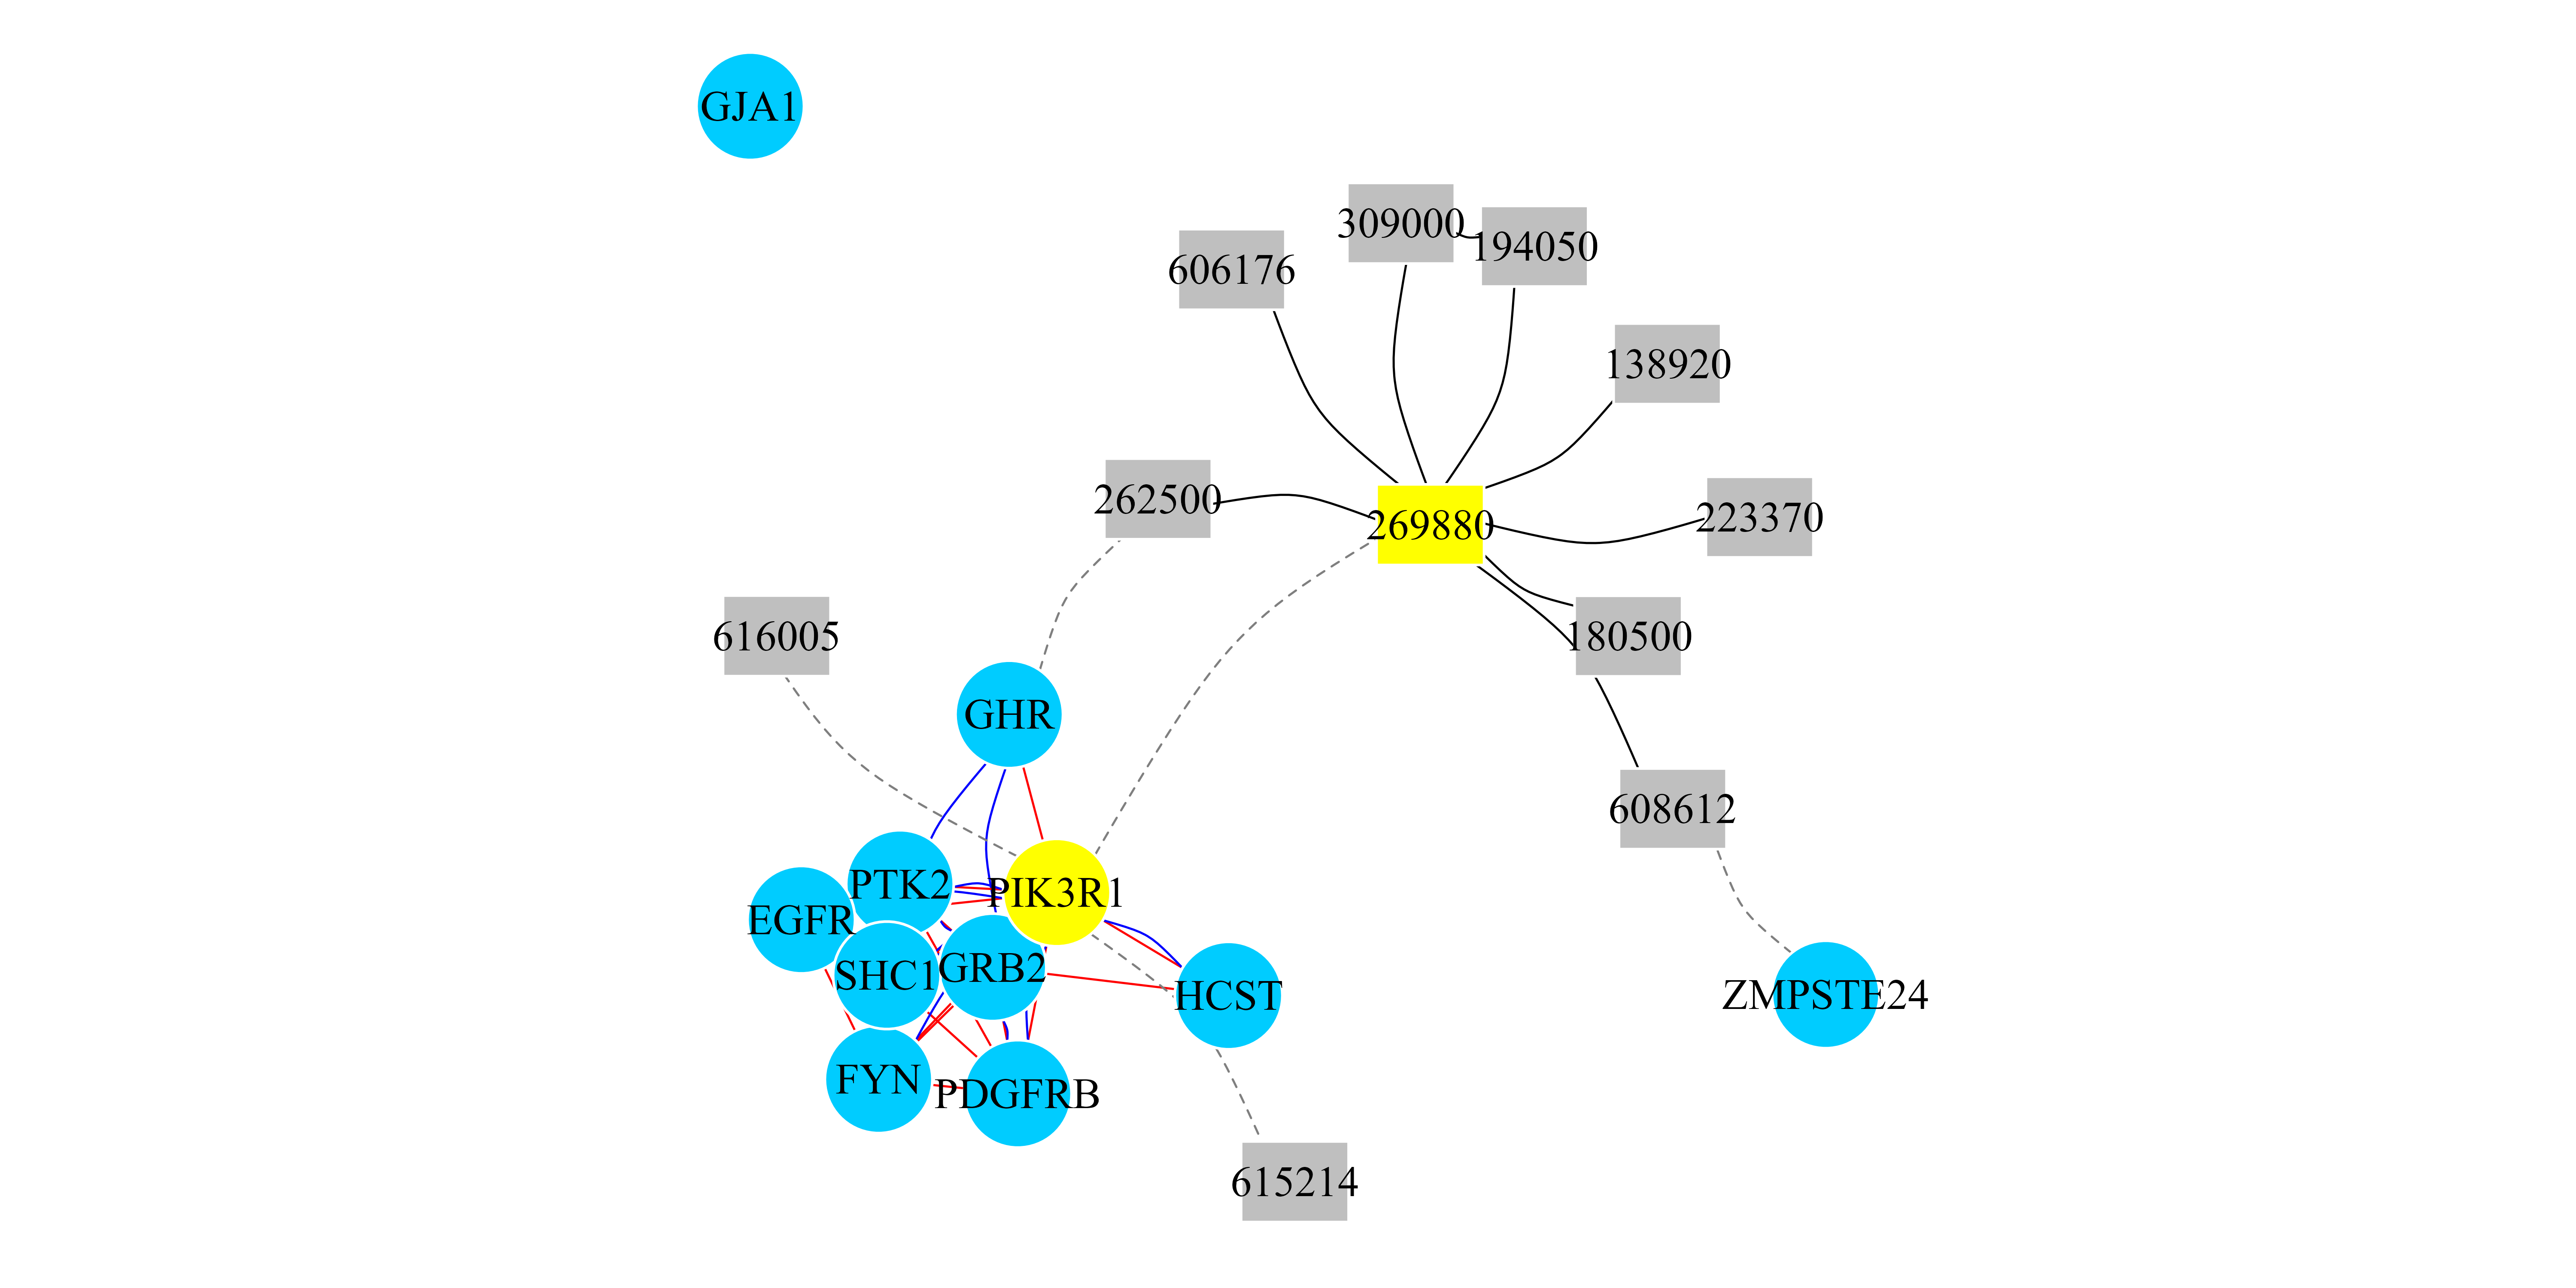 Figure 4: RWR-MH on a multiplex and heterogeneous network (PPI-Pathway-Disease). Network representation of the top 10 ranked genes and the top 10 ranked diseases when the RWR-H algorithm is executed using the PIK3R1 gene and the SHORT syndrome disease (MIM code: 269880) as seeds (yellow nodes). Circular nodes represent genes and rectangular nodes show diseases. Blue curved edges are PPI interactions and red straight edges are Pathways links. Black edges are similarity links between diseases. Dashed edges are the bipartite gene-disease associations. Multiplex interactions are aggregated into a monoplex network only for visualization purposes.